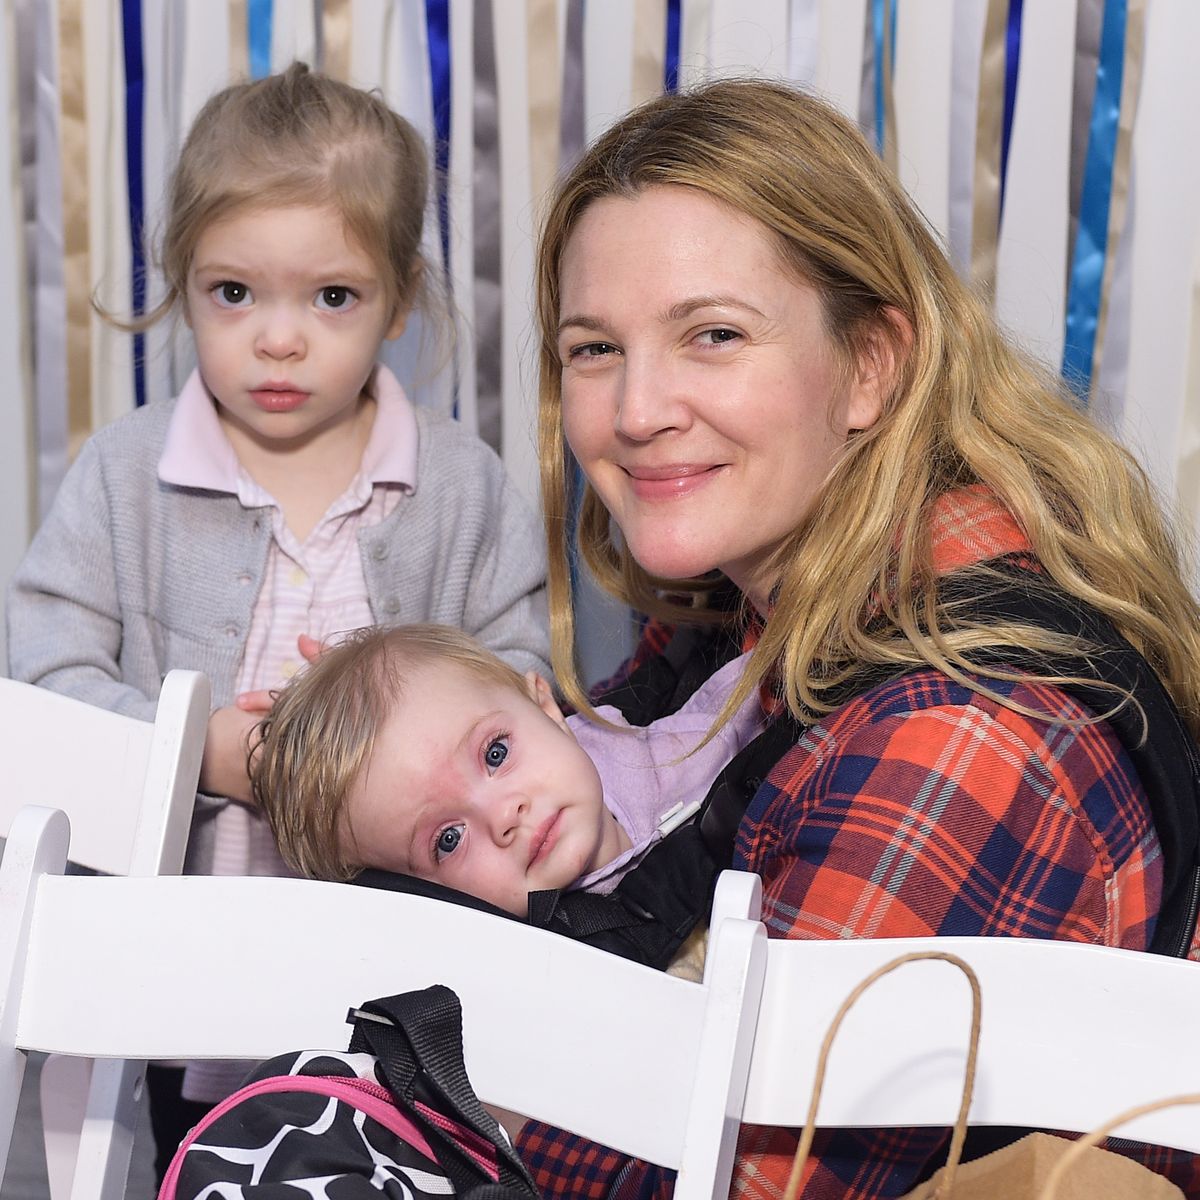 Drew Barrymore with her kids